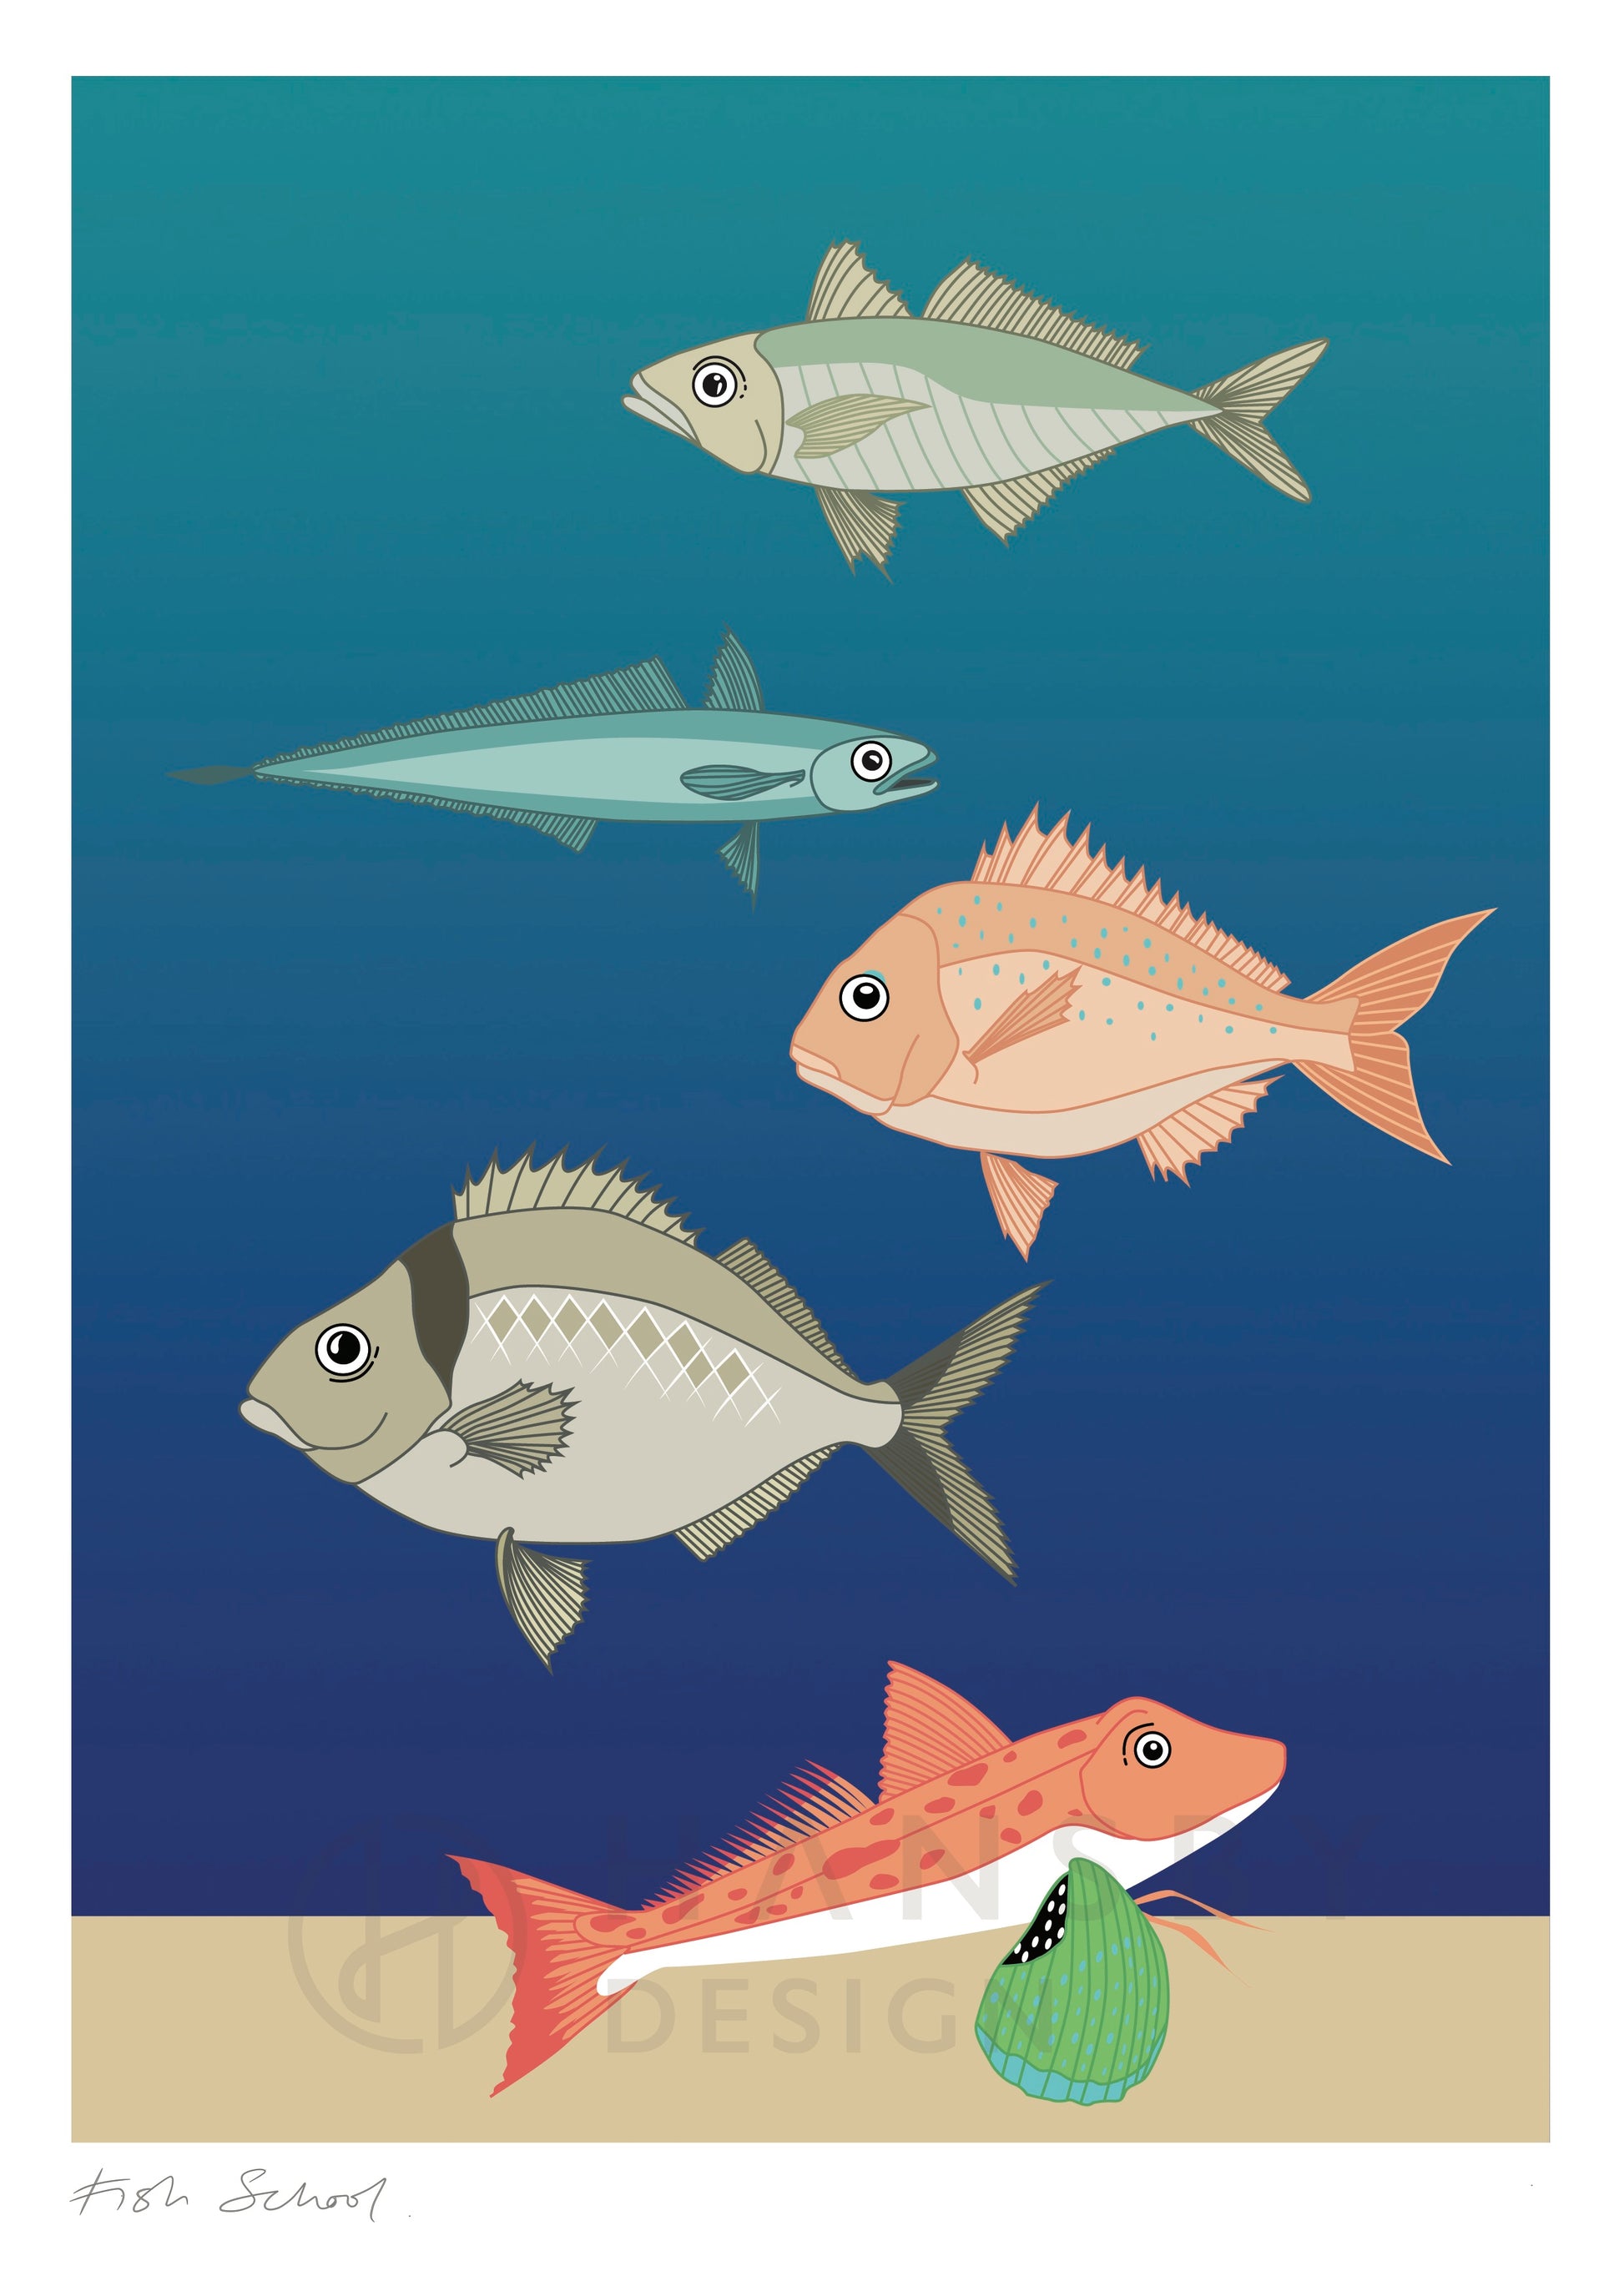 Art print of New Zealand fish by Hansby Design, titled Fish School